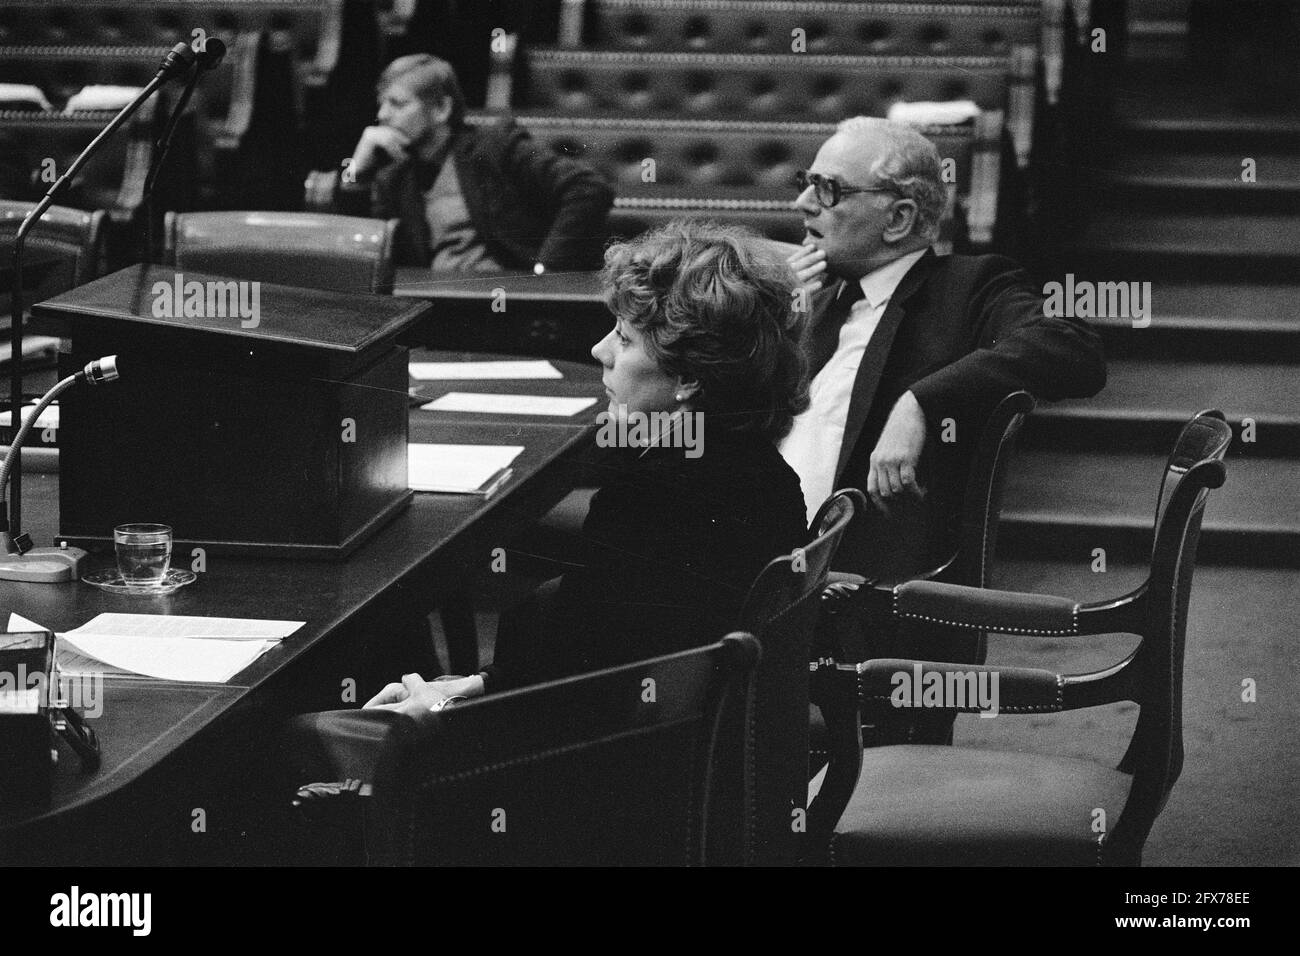 In the Lower House, PvdA member Kombrink asked questions regarding Postbank to Van der Stee and Smit-Kroes. Both ministers behind the government table, November 20, 1980, ministers, The Netherlands, 20th century press agency photo, news to remember, documentary, historic photography 1945-1990, visual stories, human history of the Twentieth Century, capturing moments in time Stock Photo